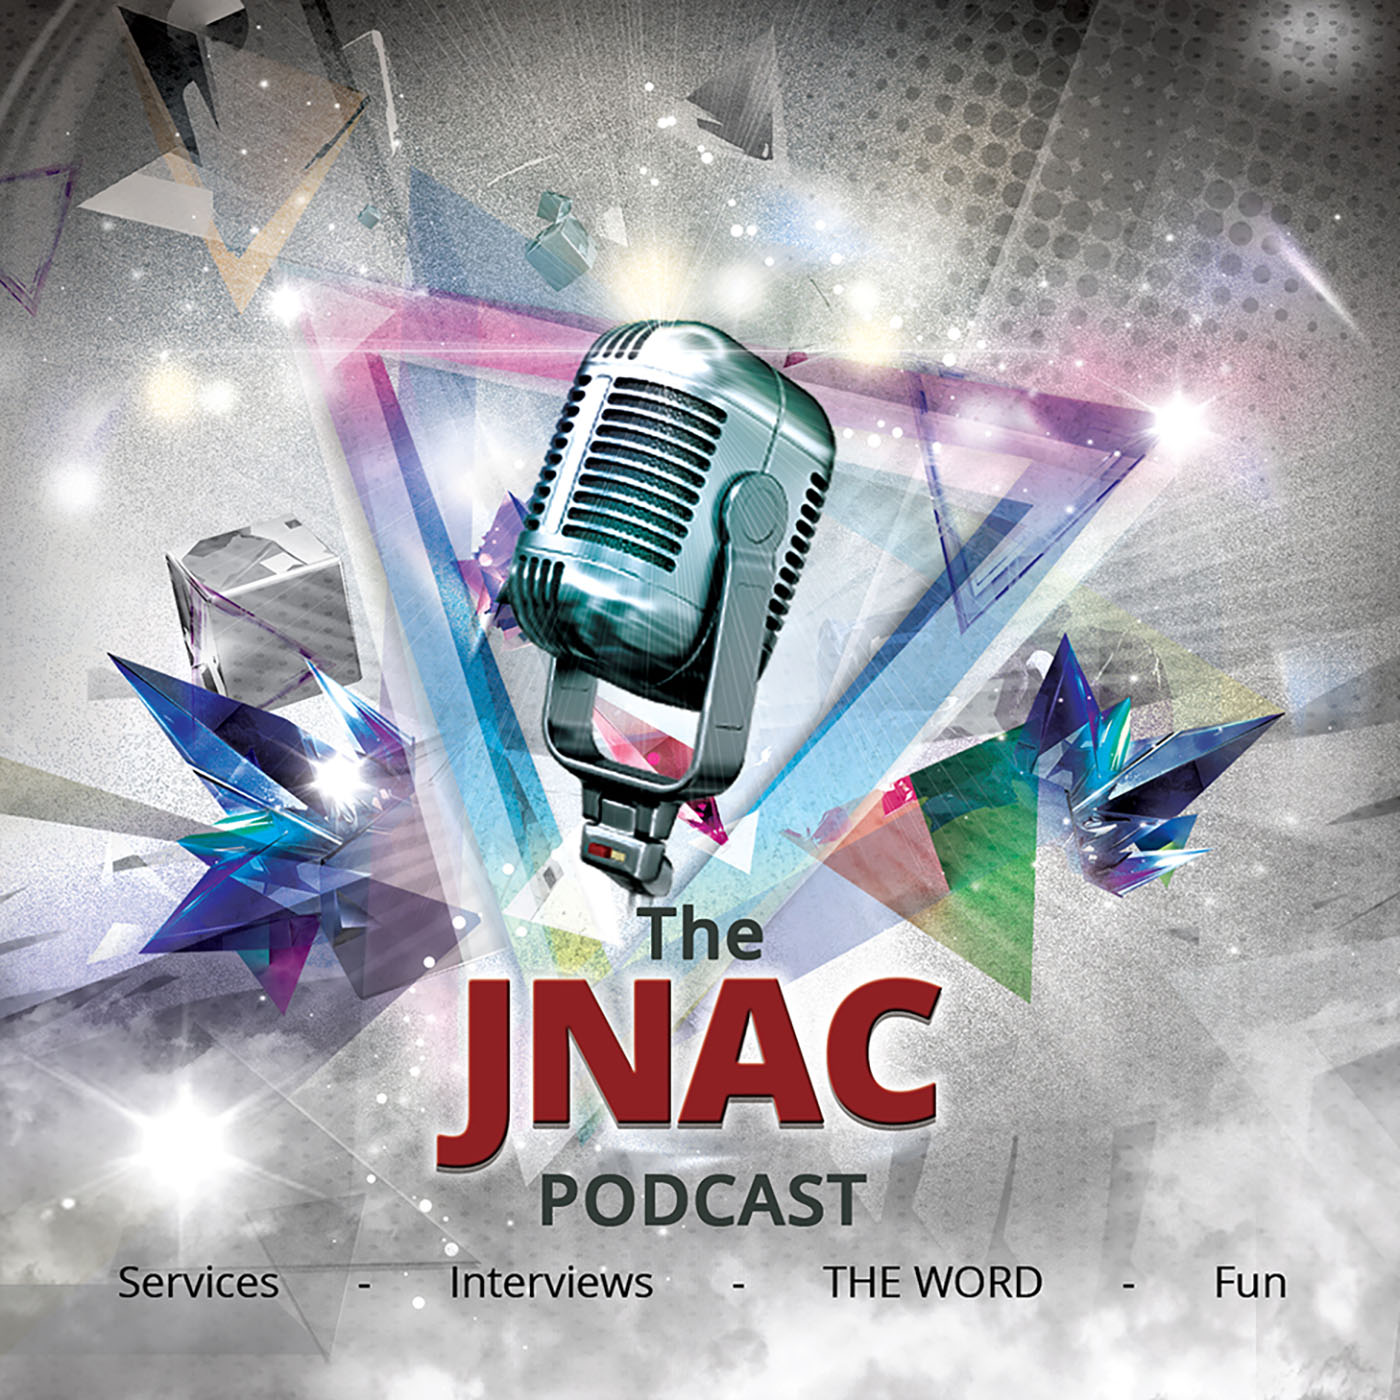 The JNAC podcast